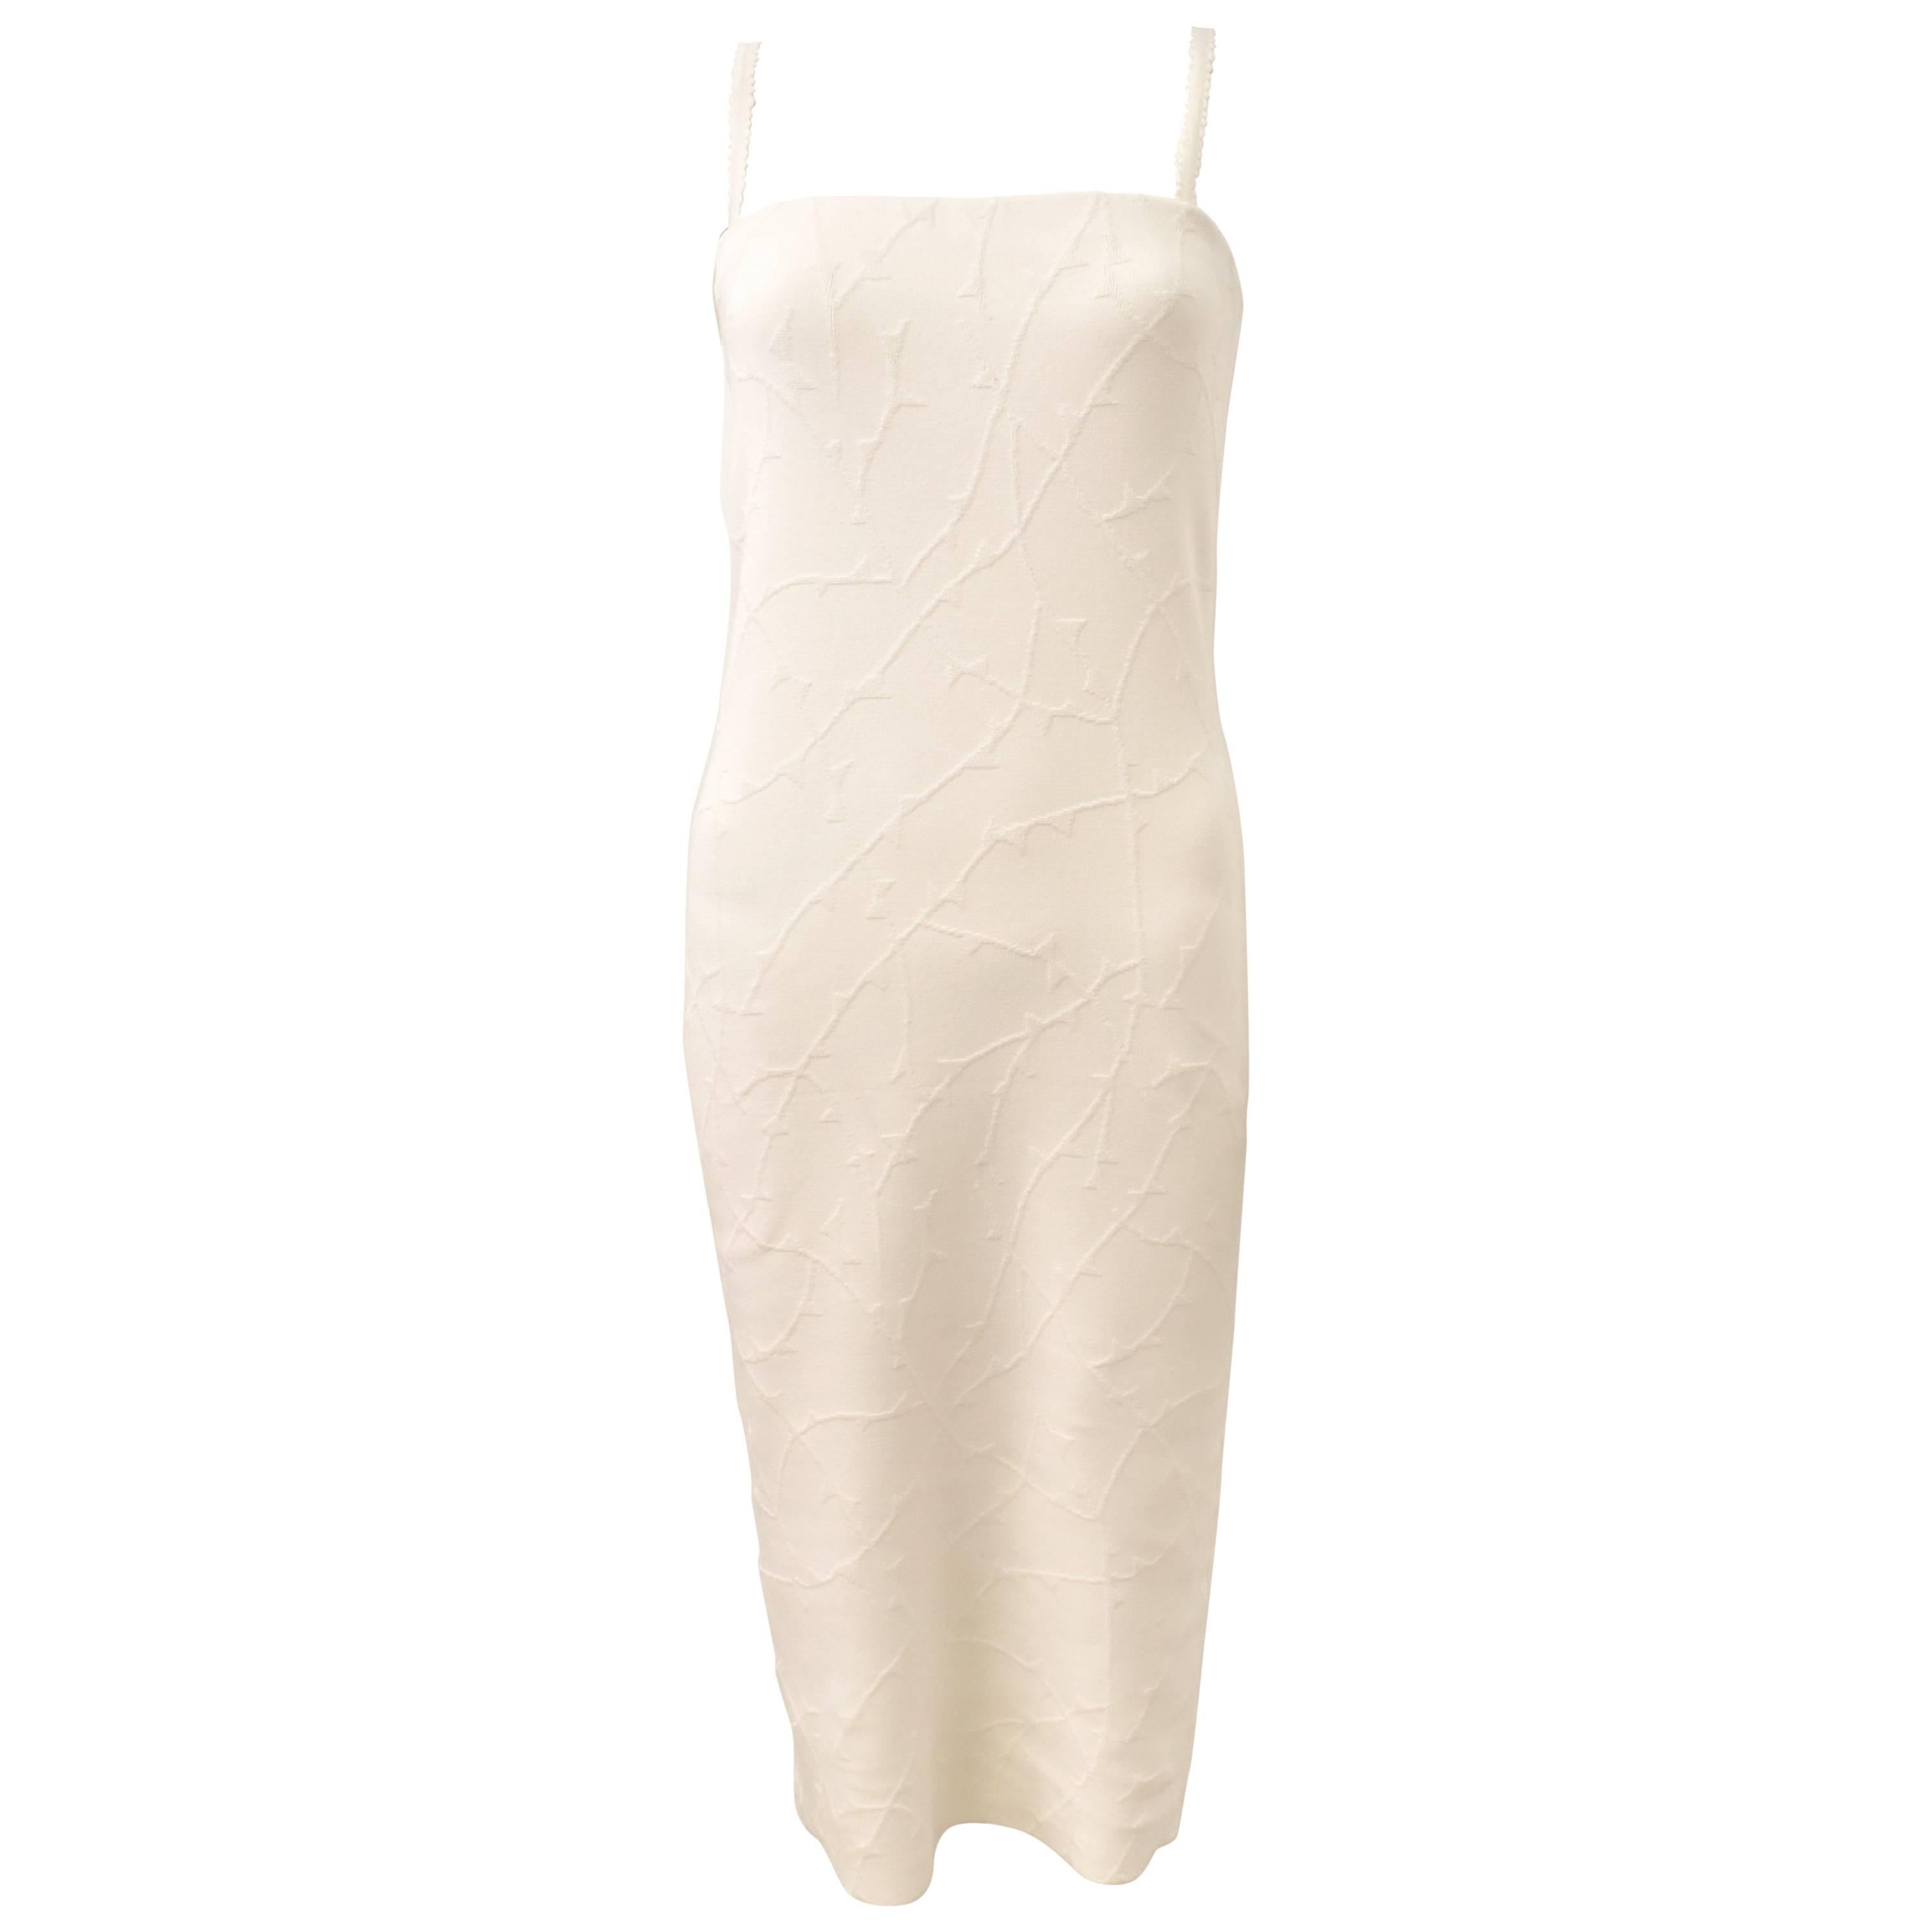 Yves Saint Laurent White Bodycon Dress with Barbed Wire Textured Fabric S/S 2010